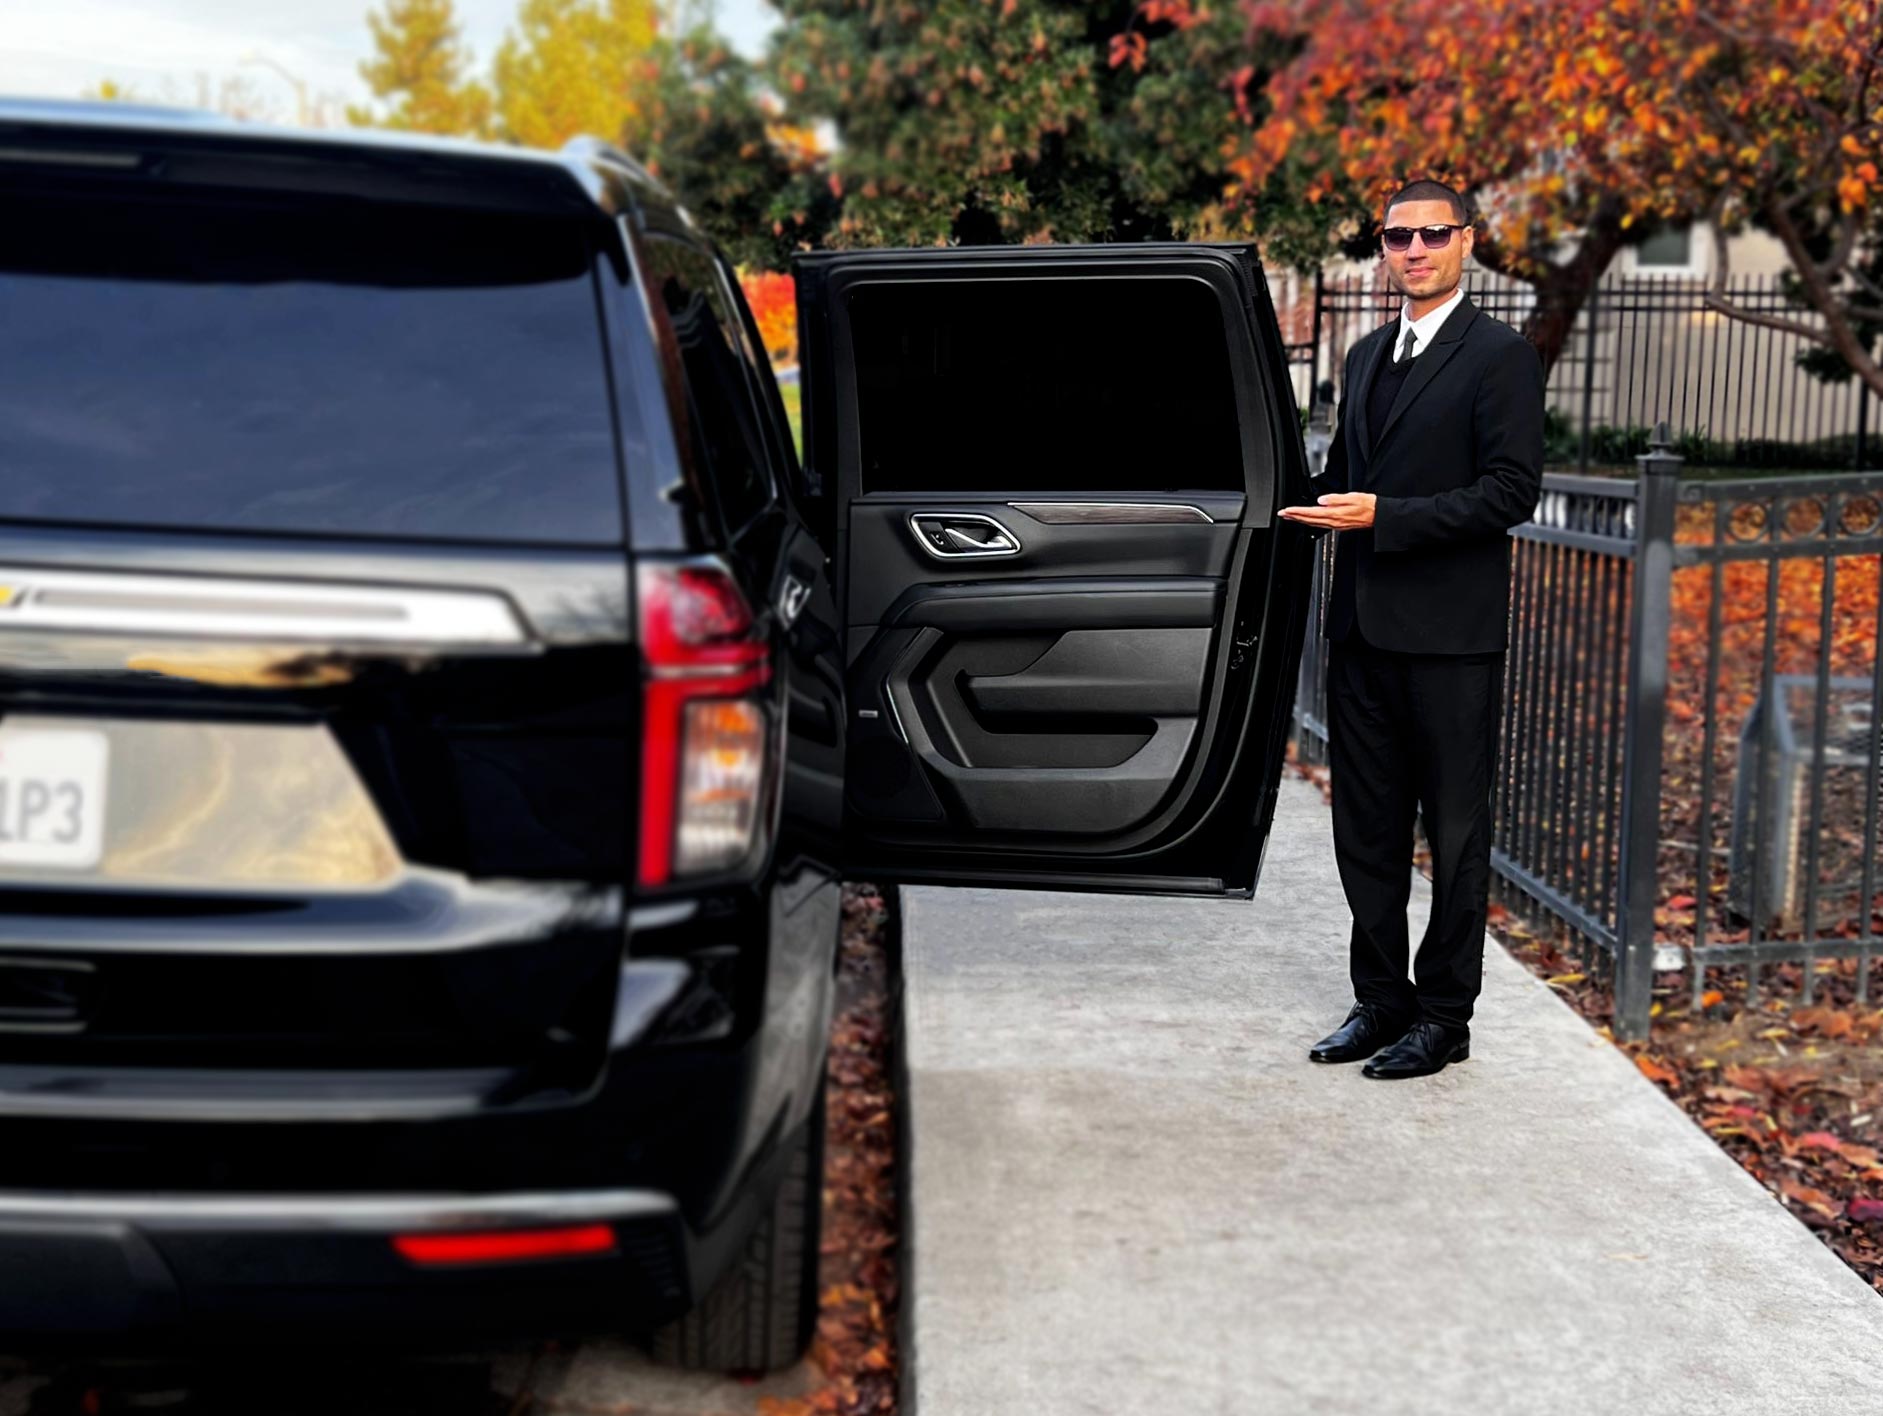 Chauffeur opening a limo door in napa valley